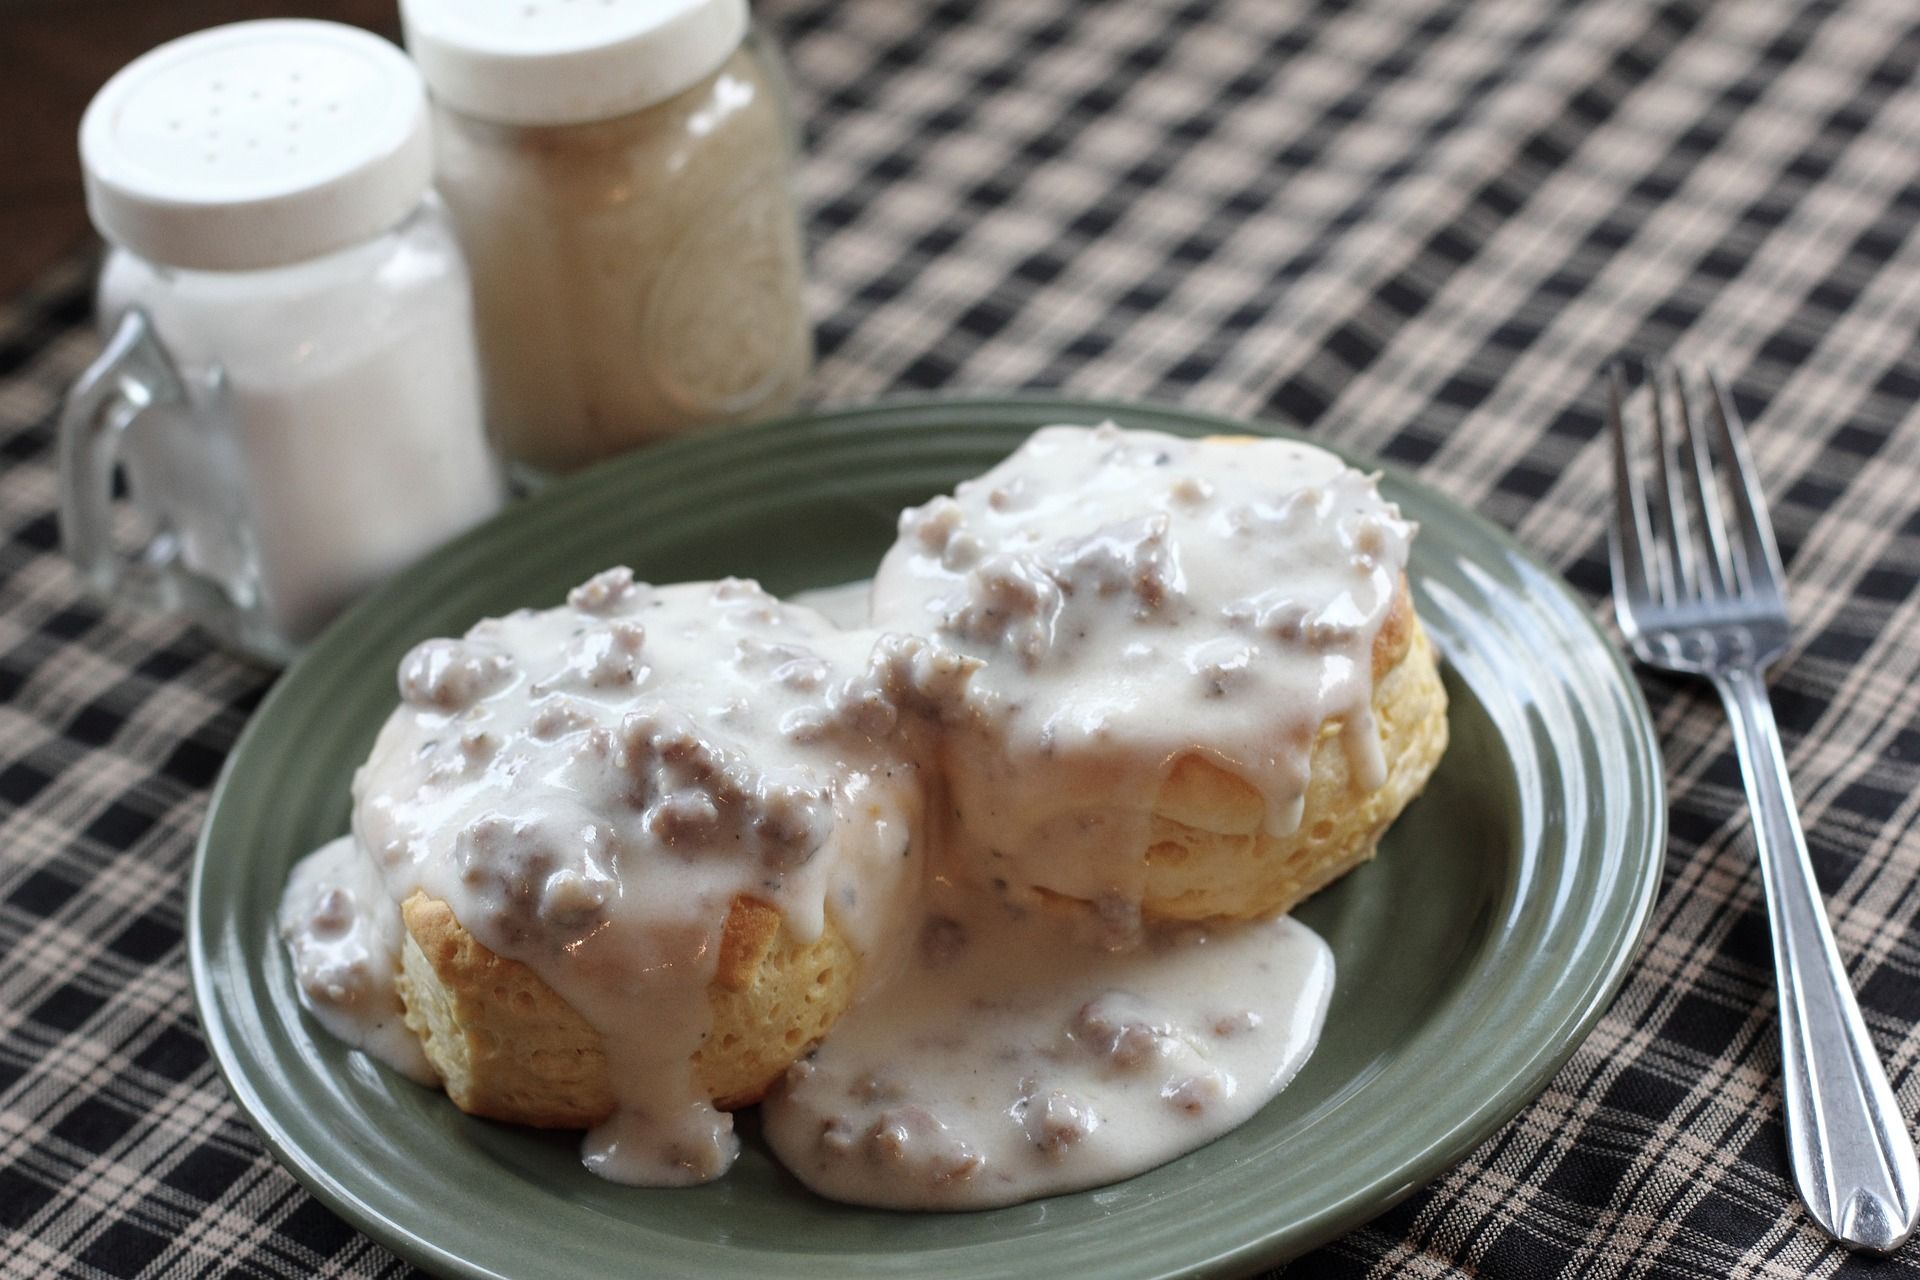 Plate of sausage gravy over biscuits on a table